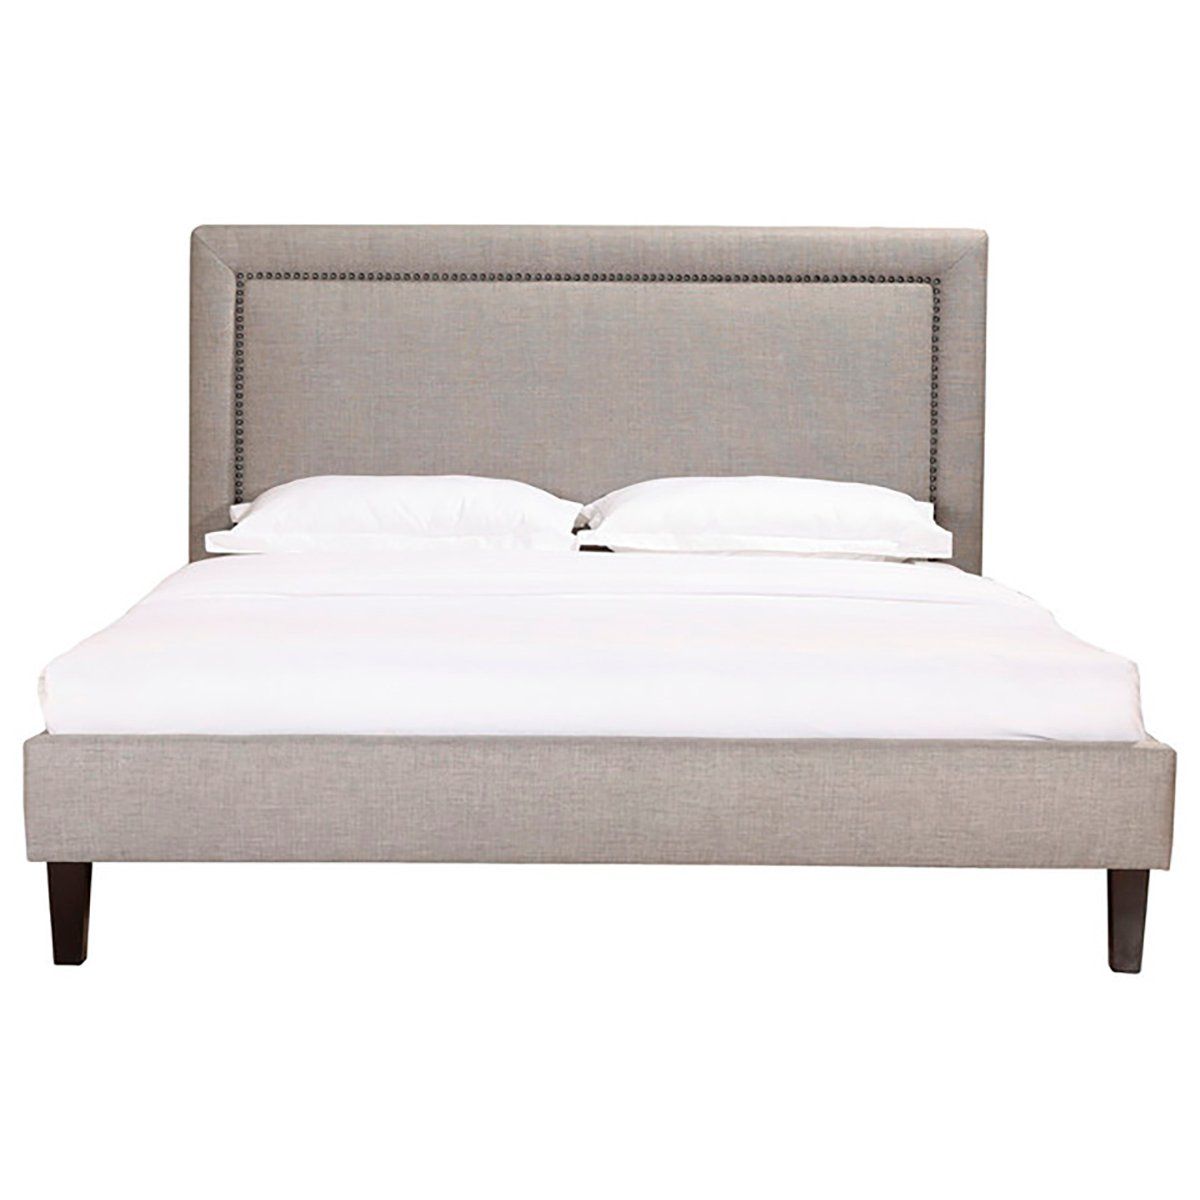 Double bed 180x200 grey Laval Upholstered